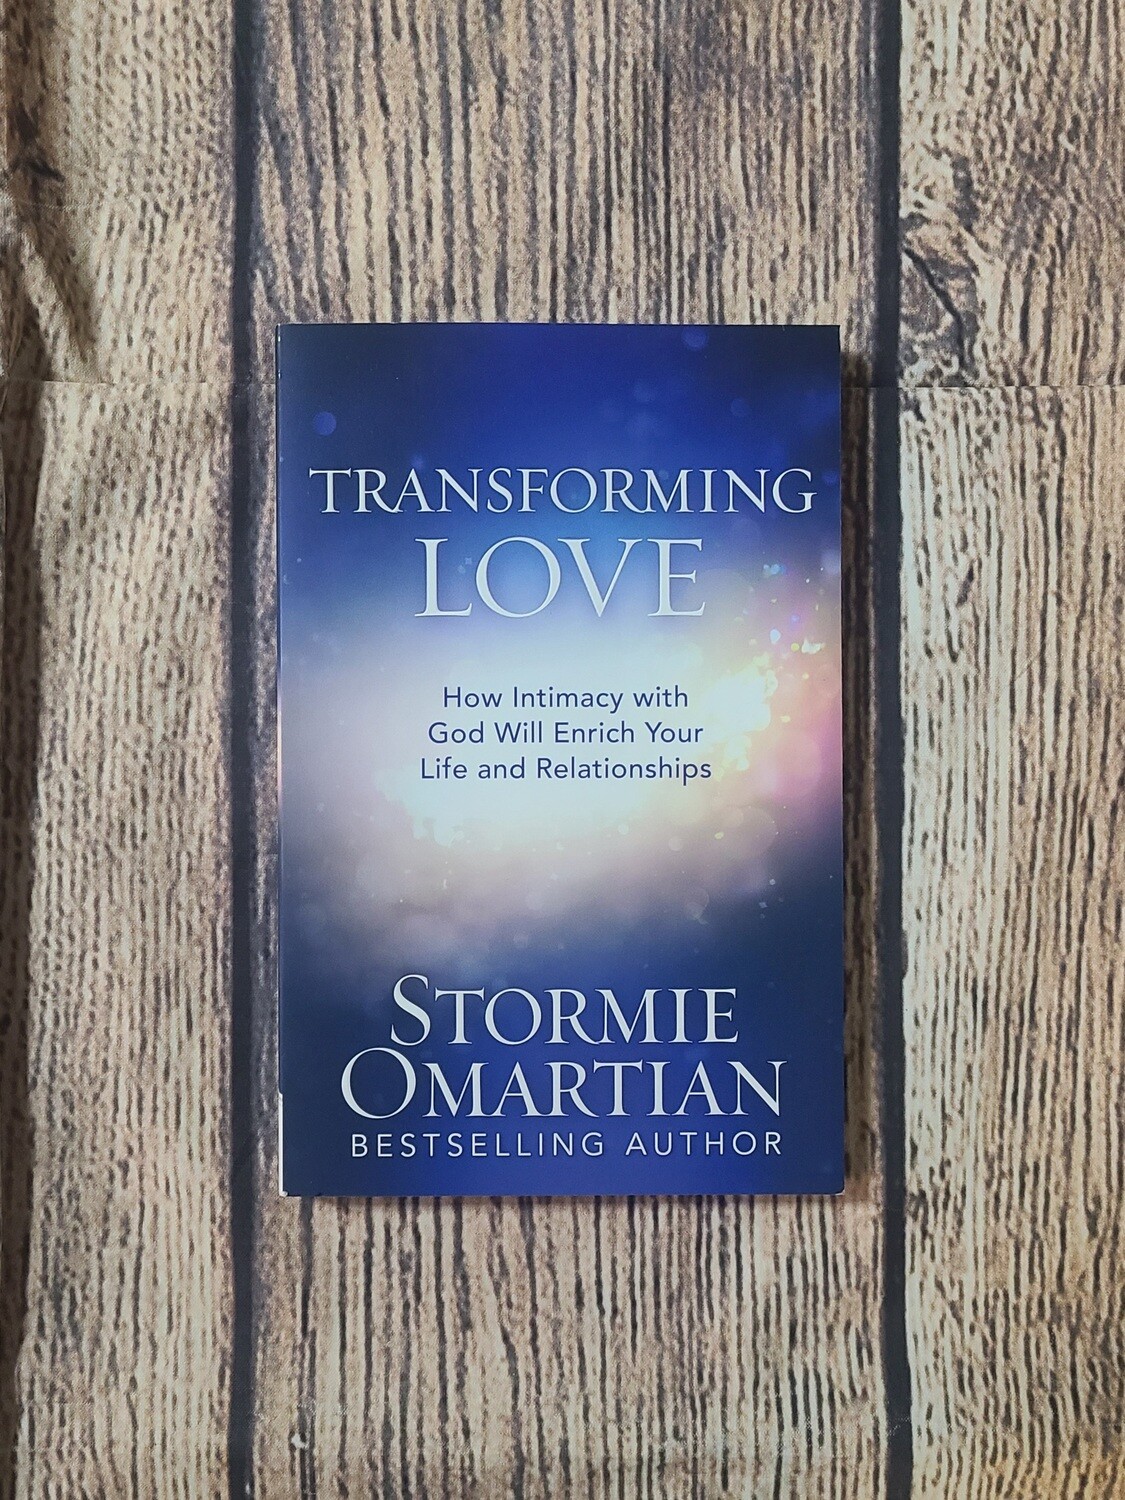 Transforming Love: How Intimacy with God will Enrich your Life and Relationships by Stormie O'Martian